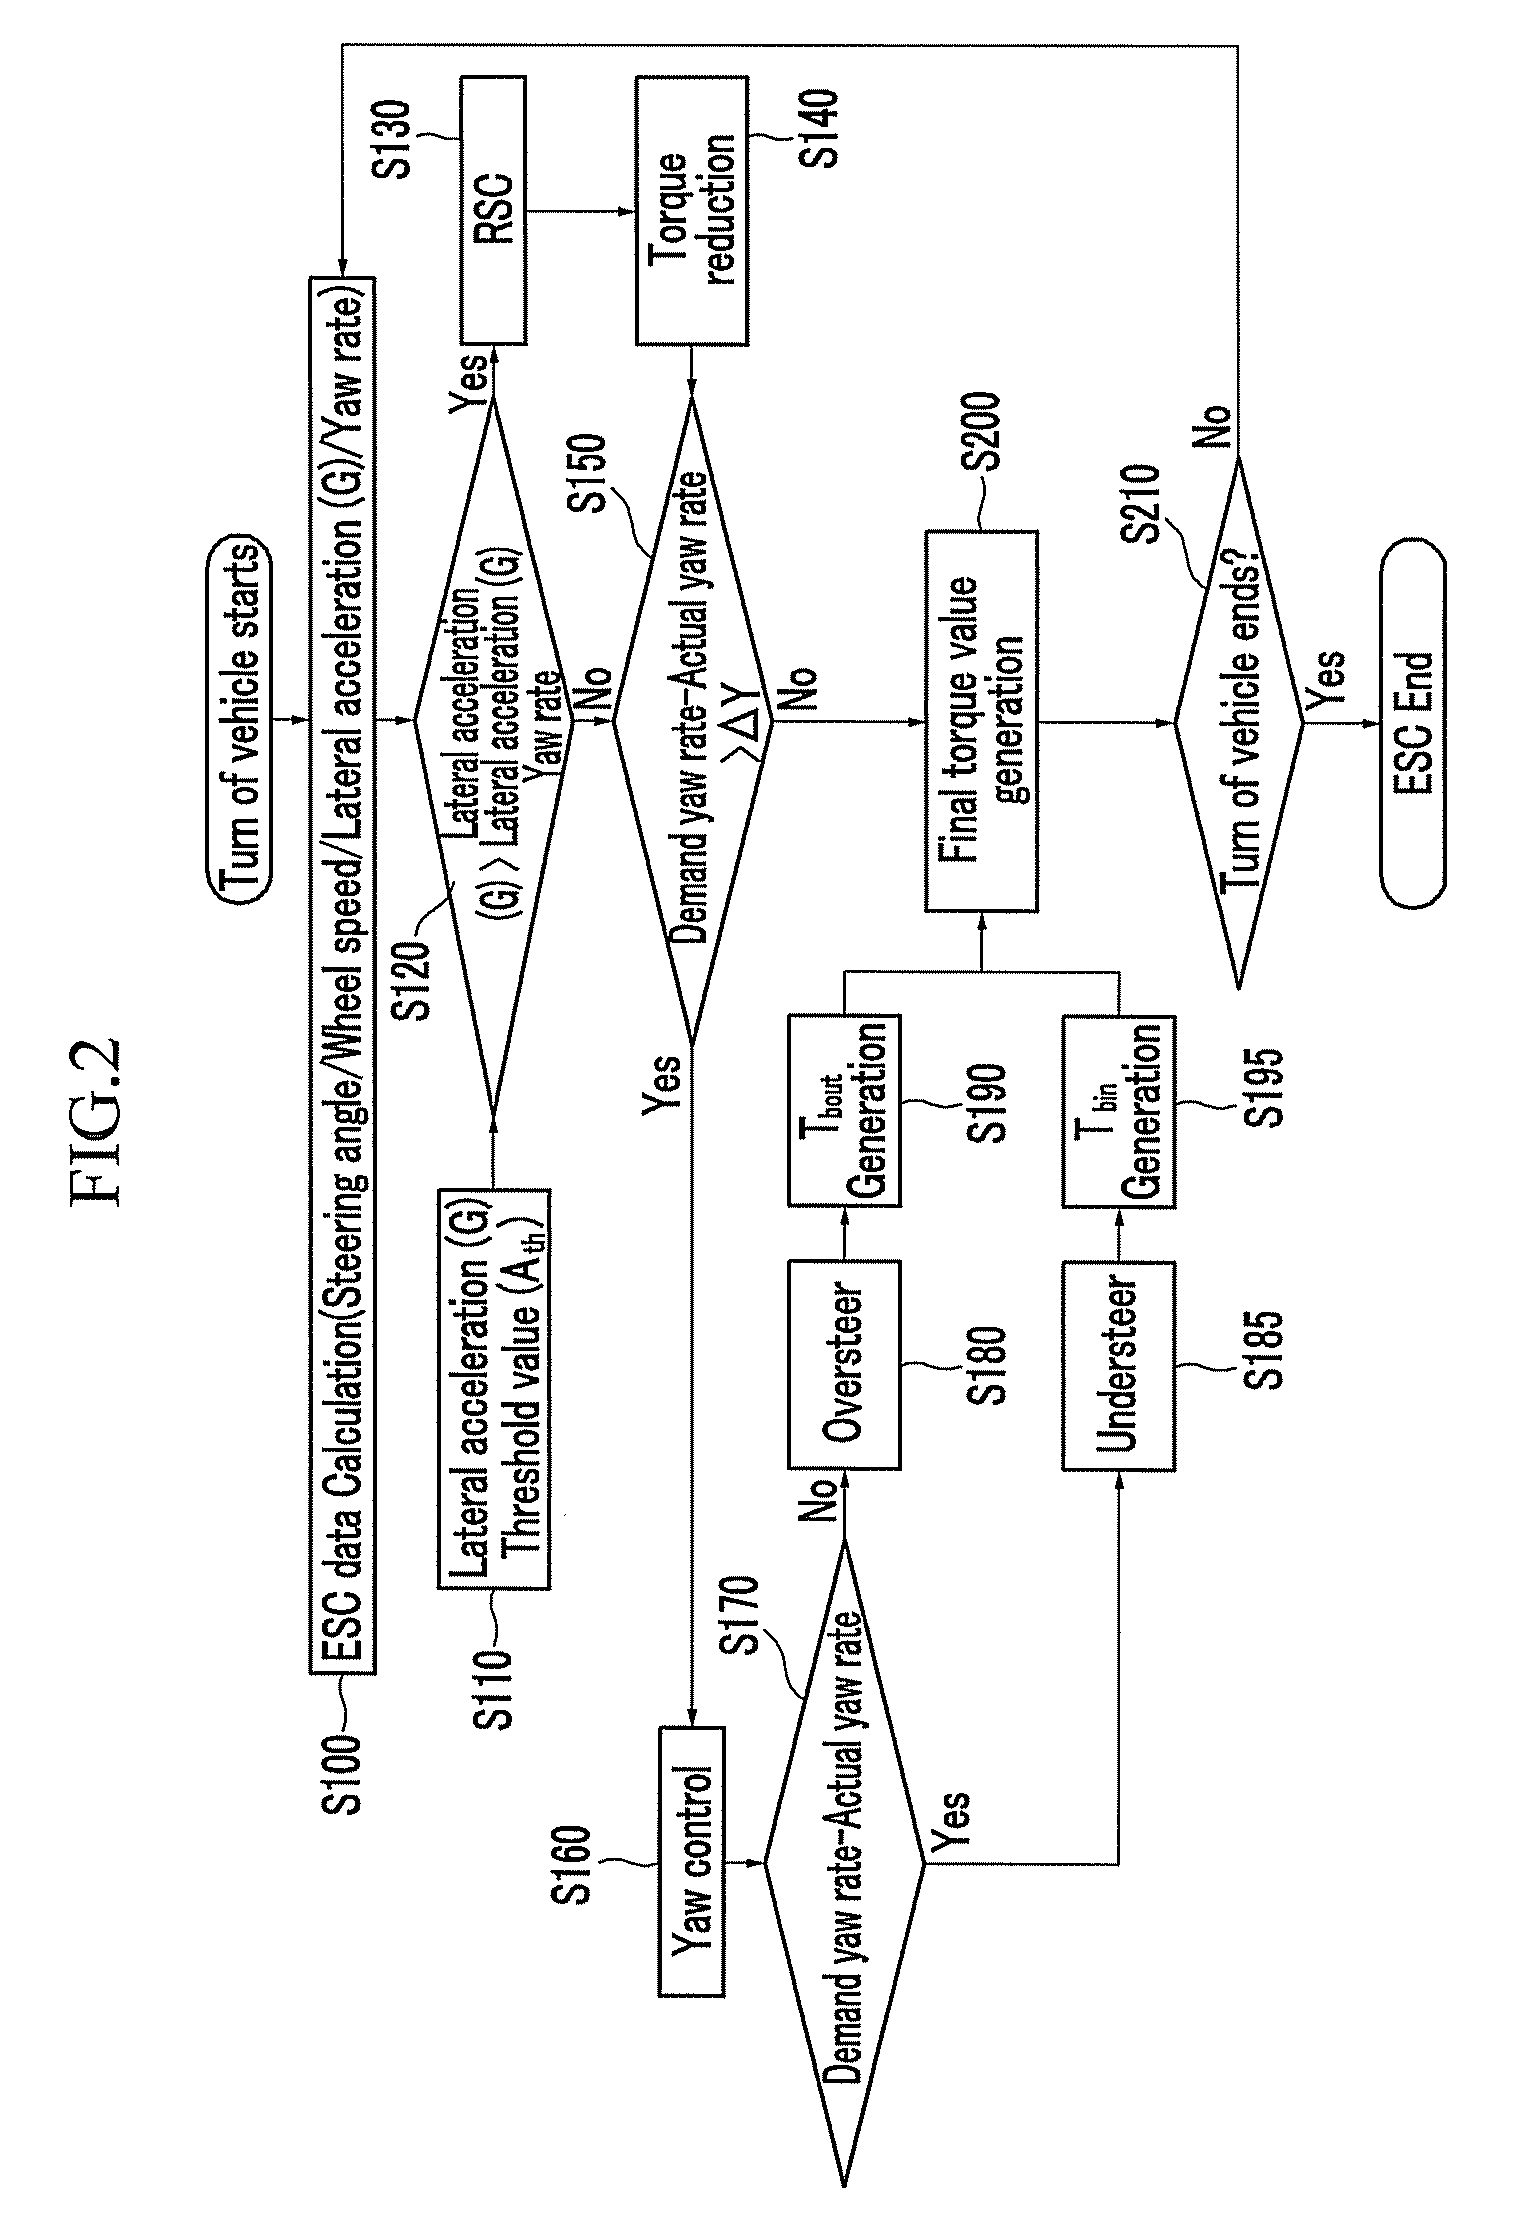 Control system and method of vehicle using in-wheel motor